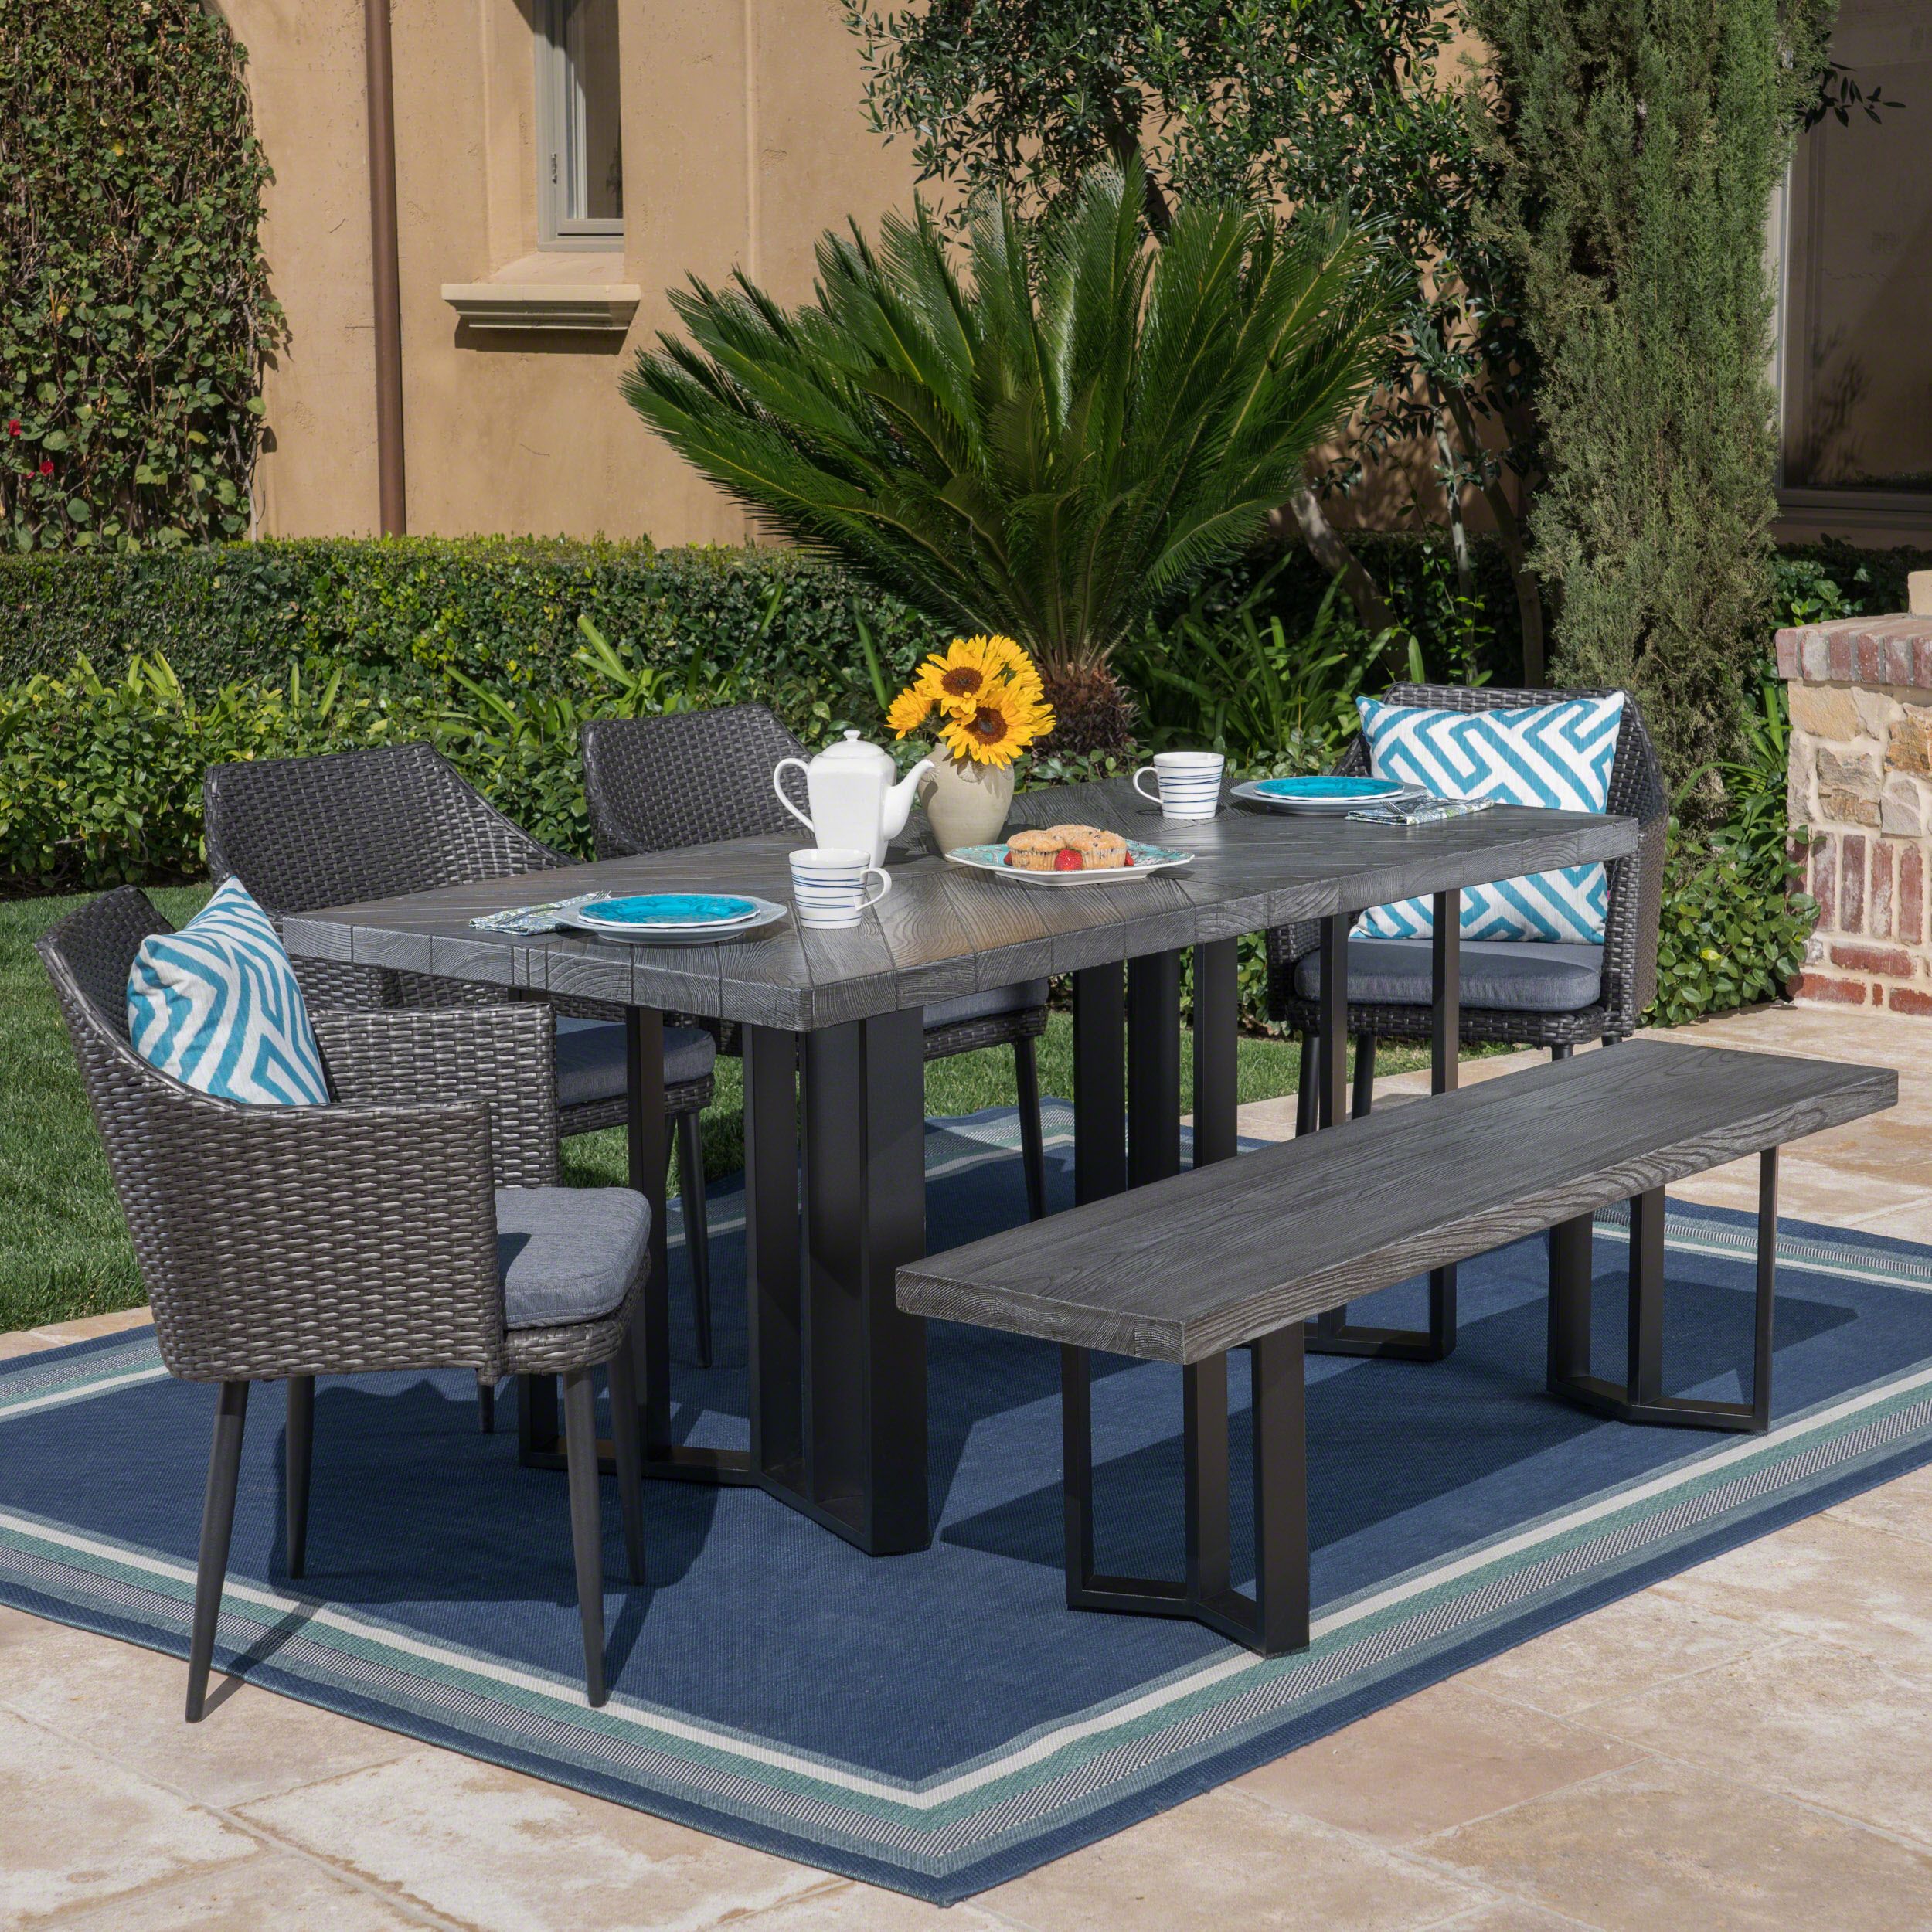 Tammy Outdoor 6 Piece Black Wicker Dining Set With Textured Grey Oak Regarding Patio Dining Sets With Cushions (View 7 of 15)